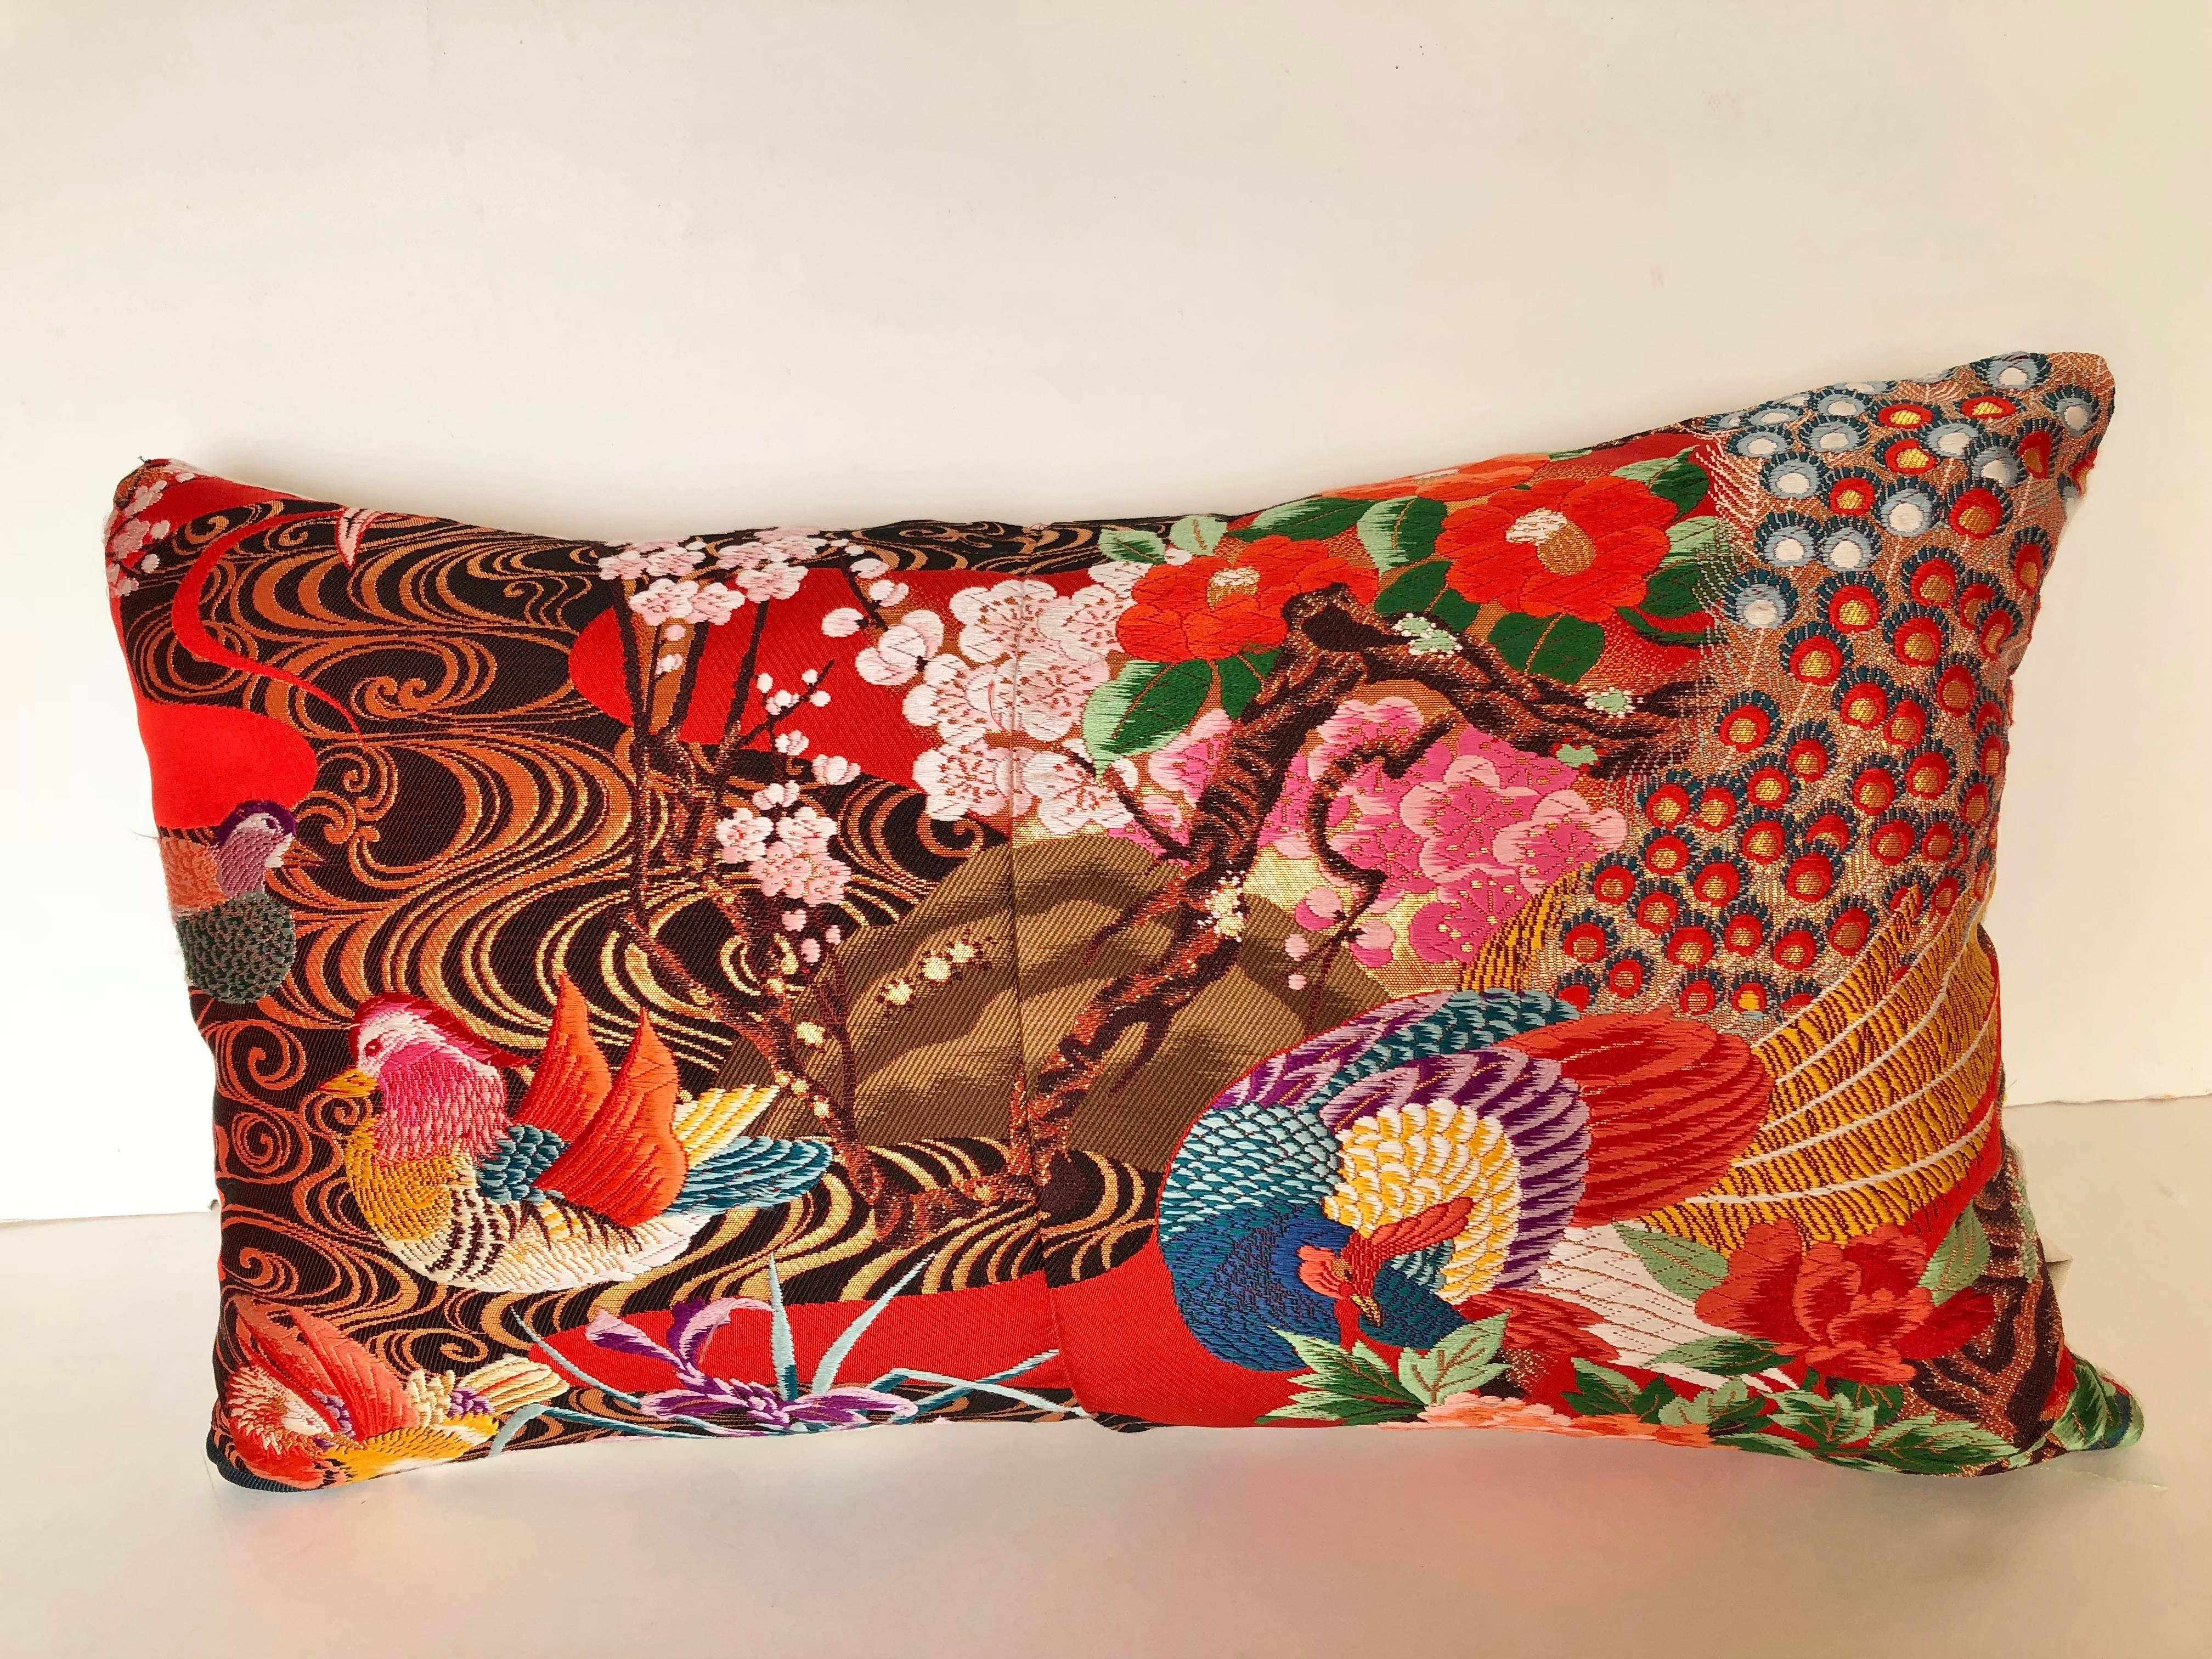 Custom pillow cut from a vintage Japanese silk Uchikake, the traditional wedding kimono. The silk has designs with the traditional Japanese florals and birds in vibrant colors. The pillow is backed in an ivory silk/linen Scalamandre textile, filled